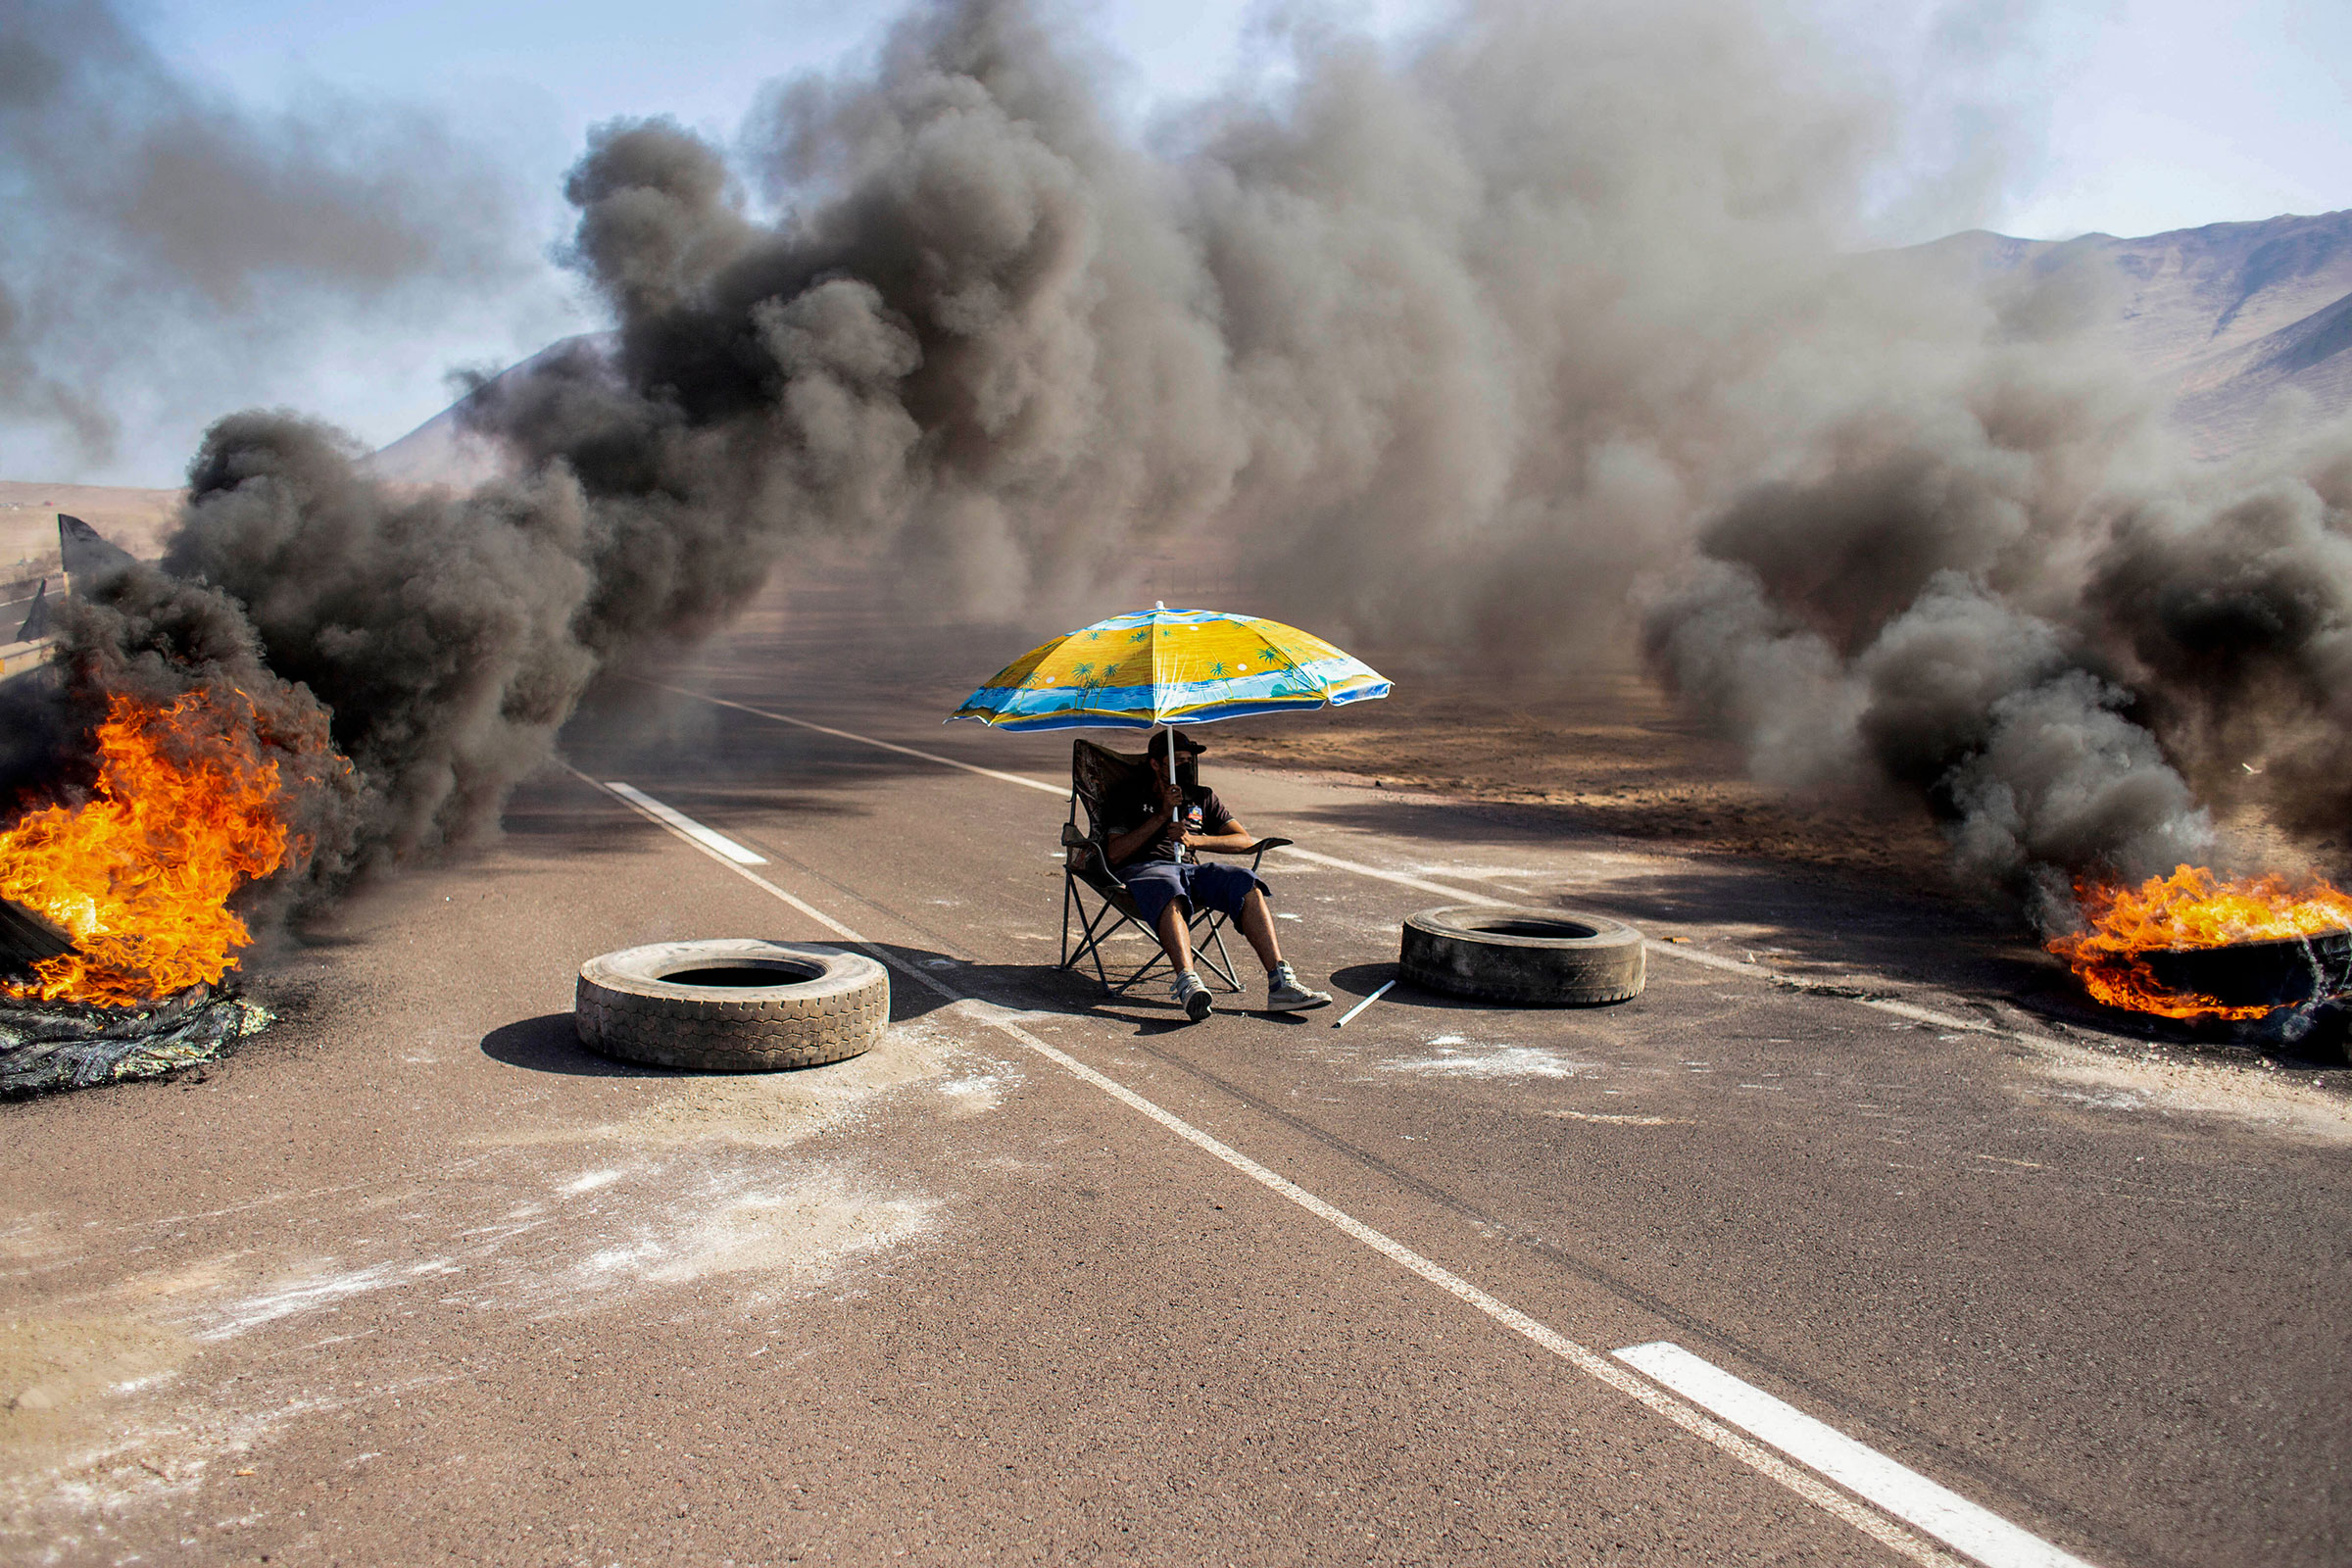 A demonstrator sits under an umbrella while blocking an access route to Iquique, Chile, during a regional strike called by different organizations against illegal immigration, on Jan. 31. (Diego Reyes—AFP/Getty Images)